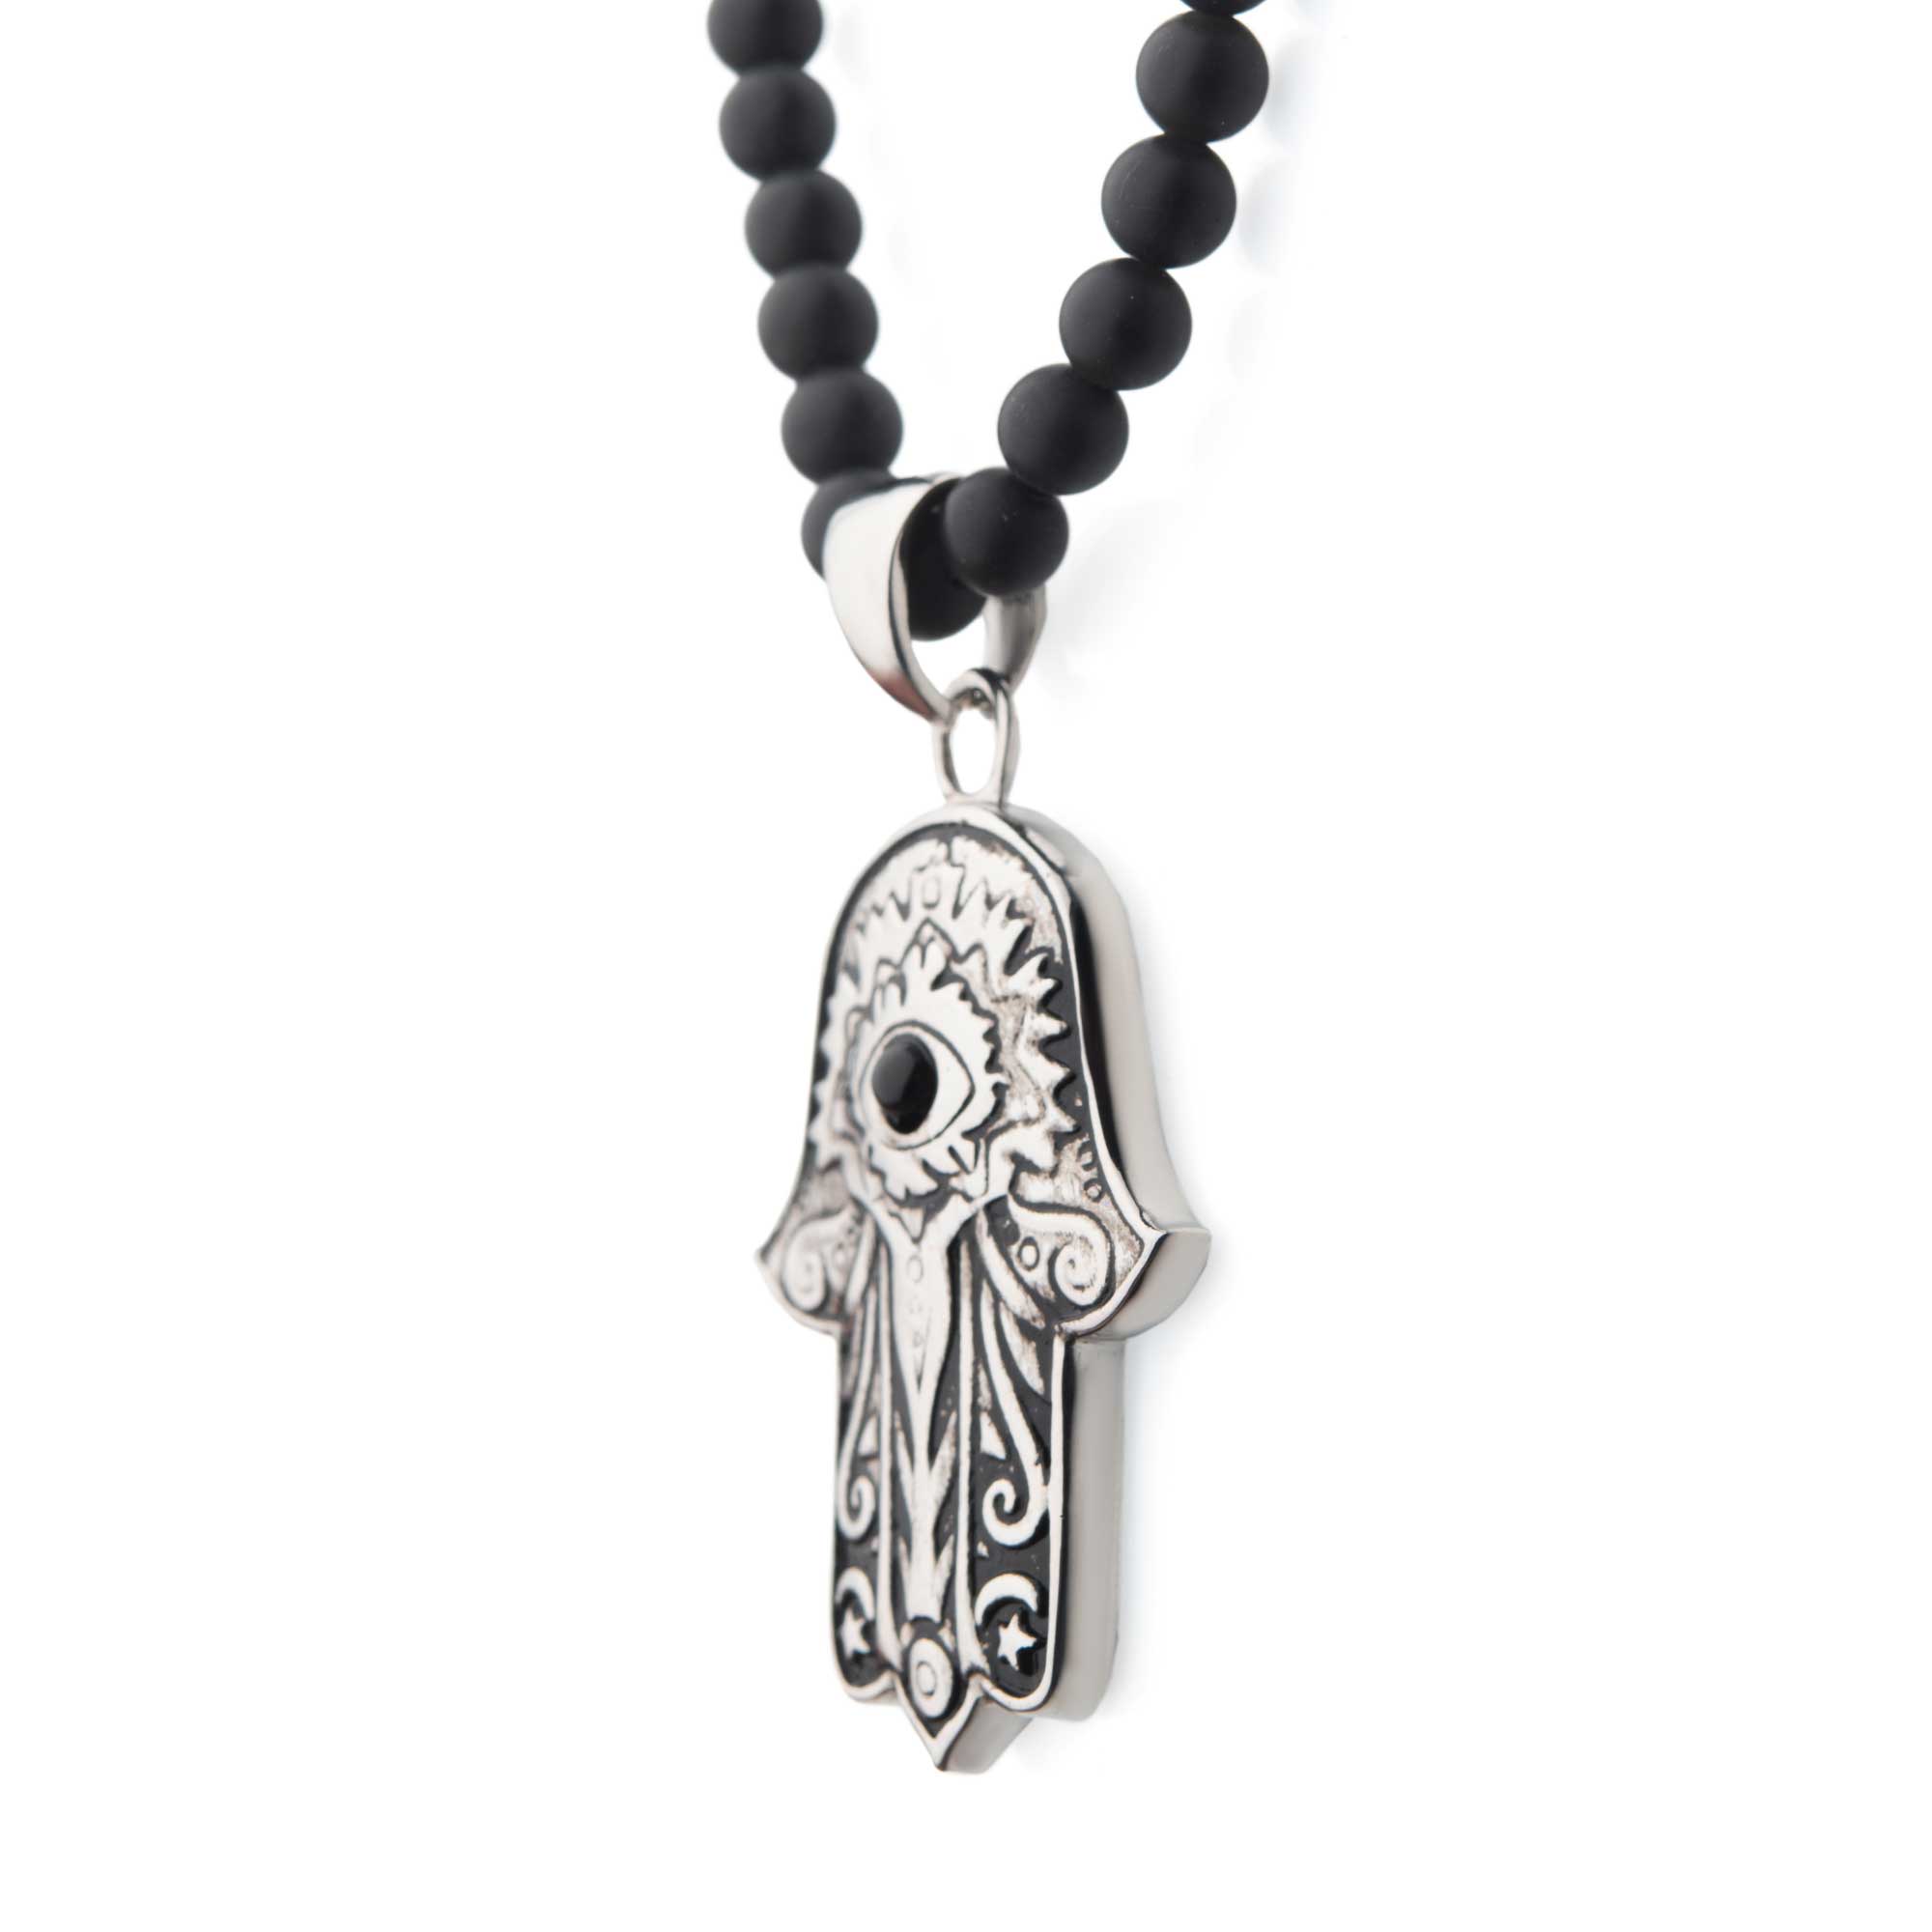 Stainless Steel with Centerpiece Black Agate Stone Hamsa Pendant, with Black Agate Stone Bead Necklace Image 3 Enchanted Jewelry Plainfield, CT